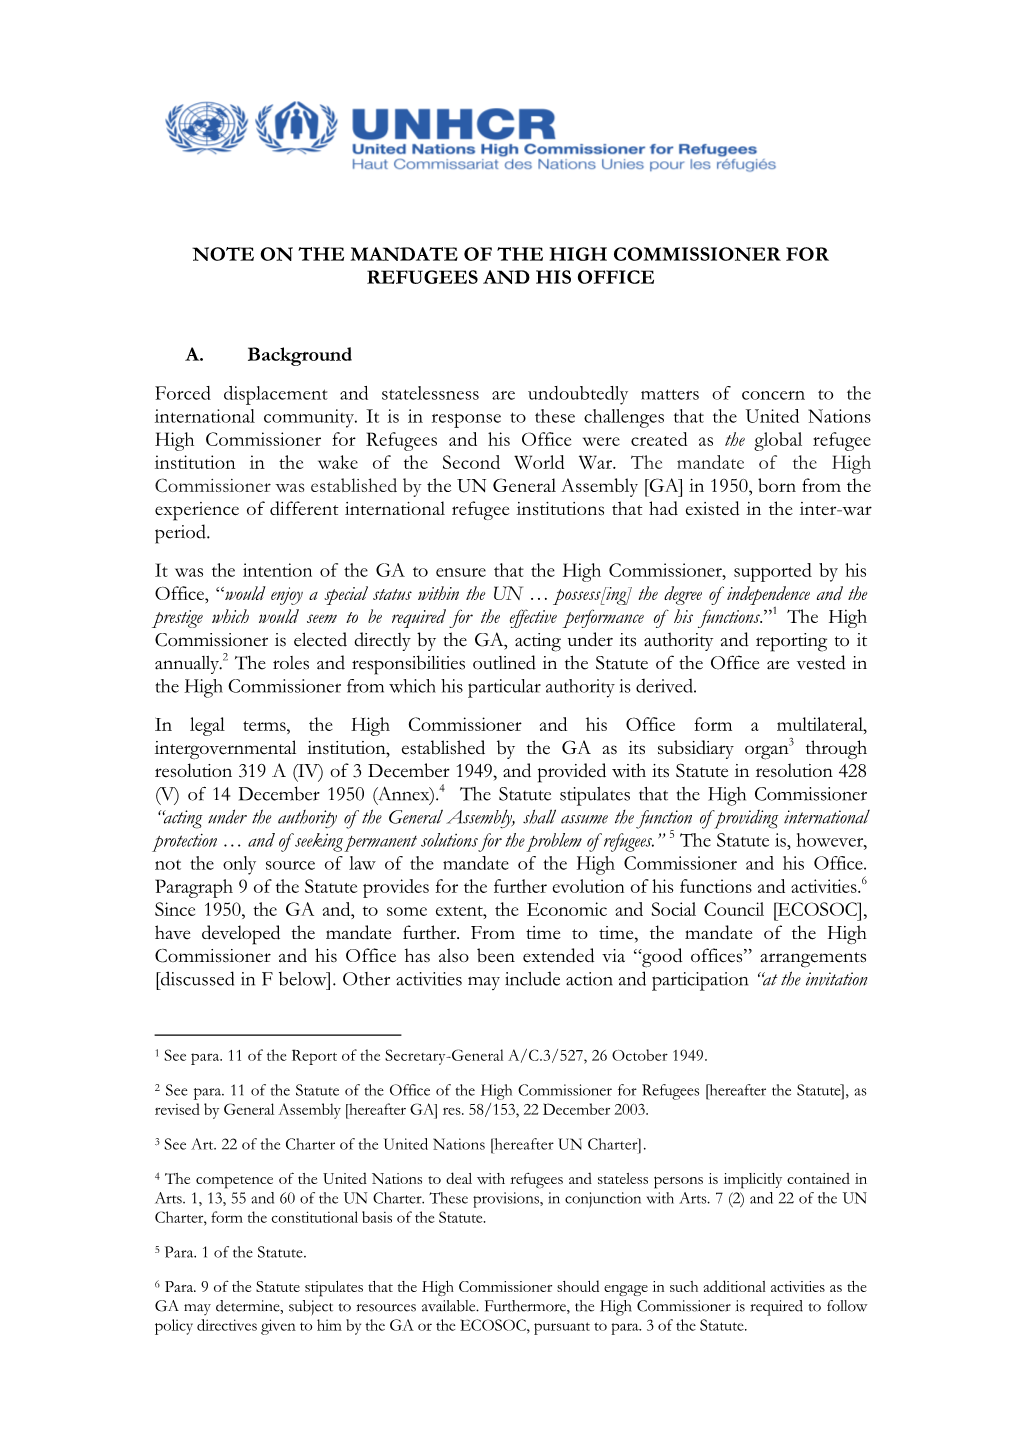 Note on the Mandate of the High Commissioner for Refugees and His Office